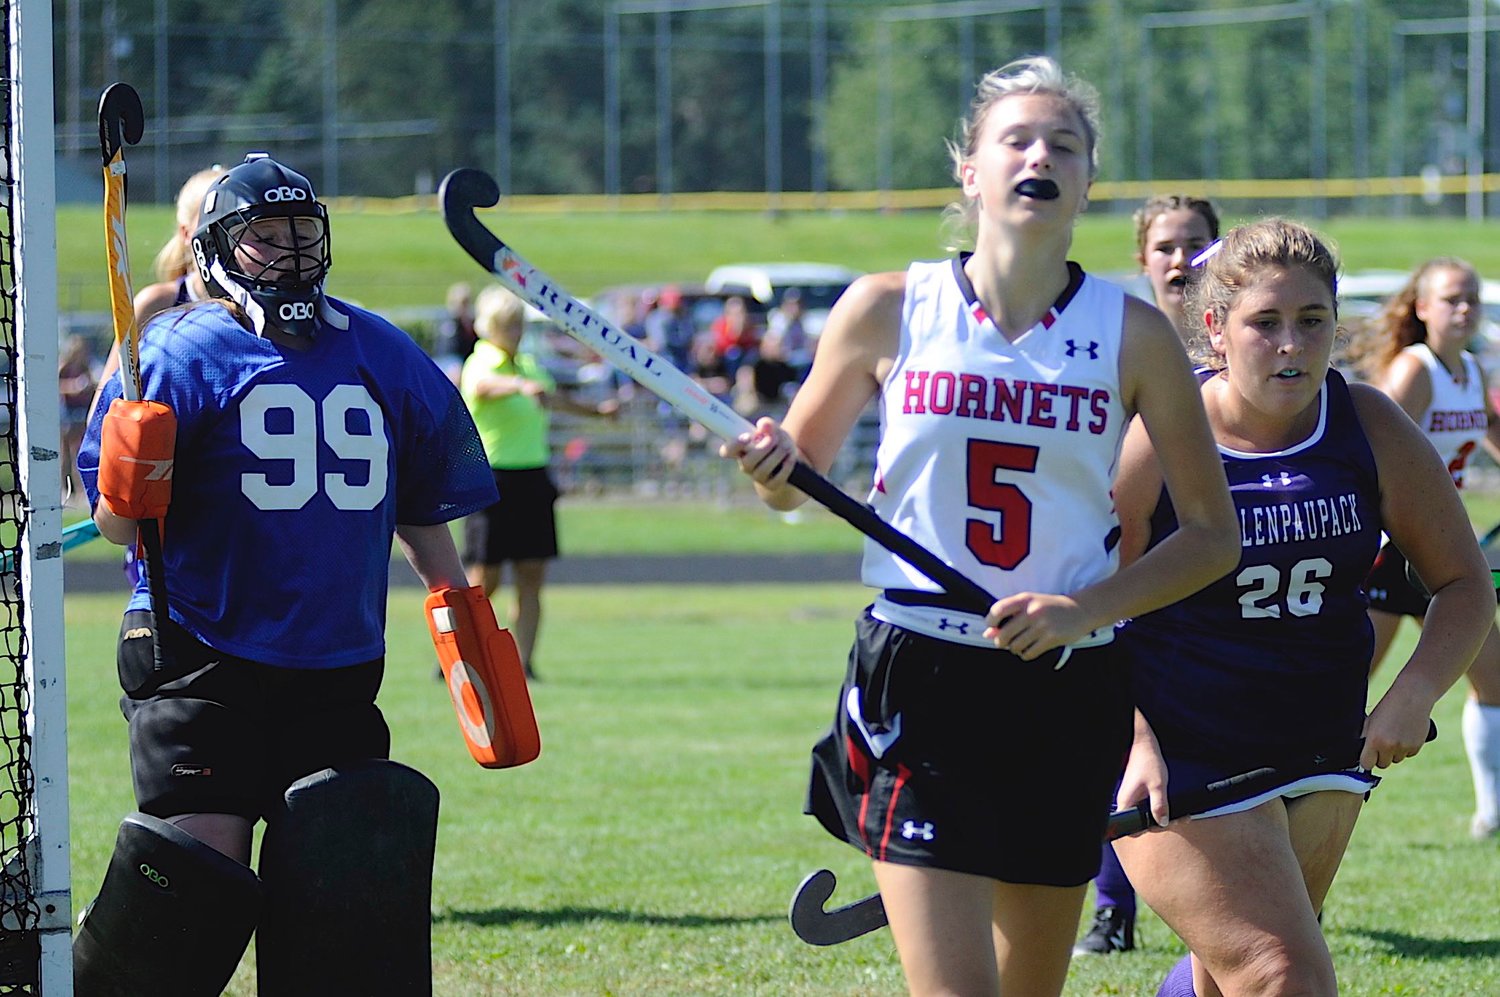 Field hockey action. Honesdale’s Ally Weber-Gump, a senior, is pictured with Lady Buckhorns' 12th-grader co-captain Abigail Calabrese and defending freshman goalie Brenna Conklin.